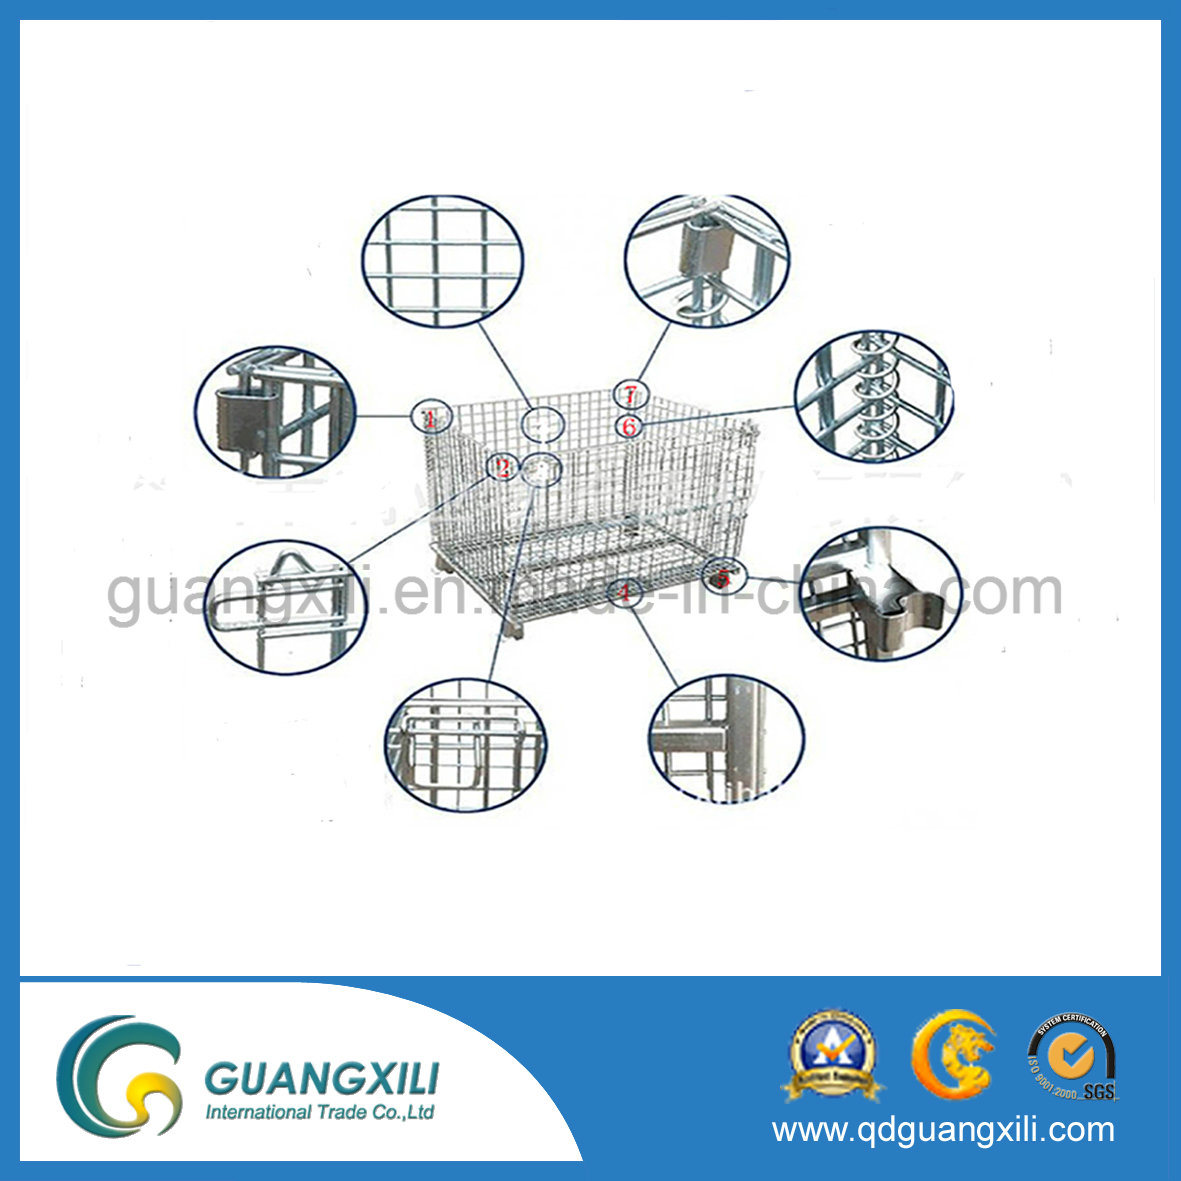 /proimages/2f0j00ojOTfhmMMszS/iron-wire-mesh-container-metal-cage.jpg